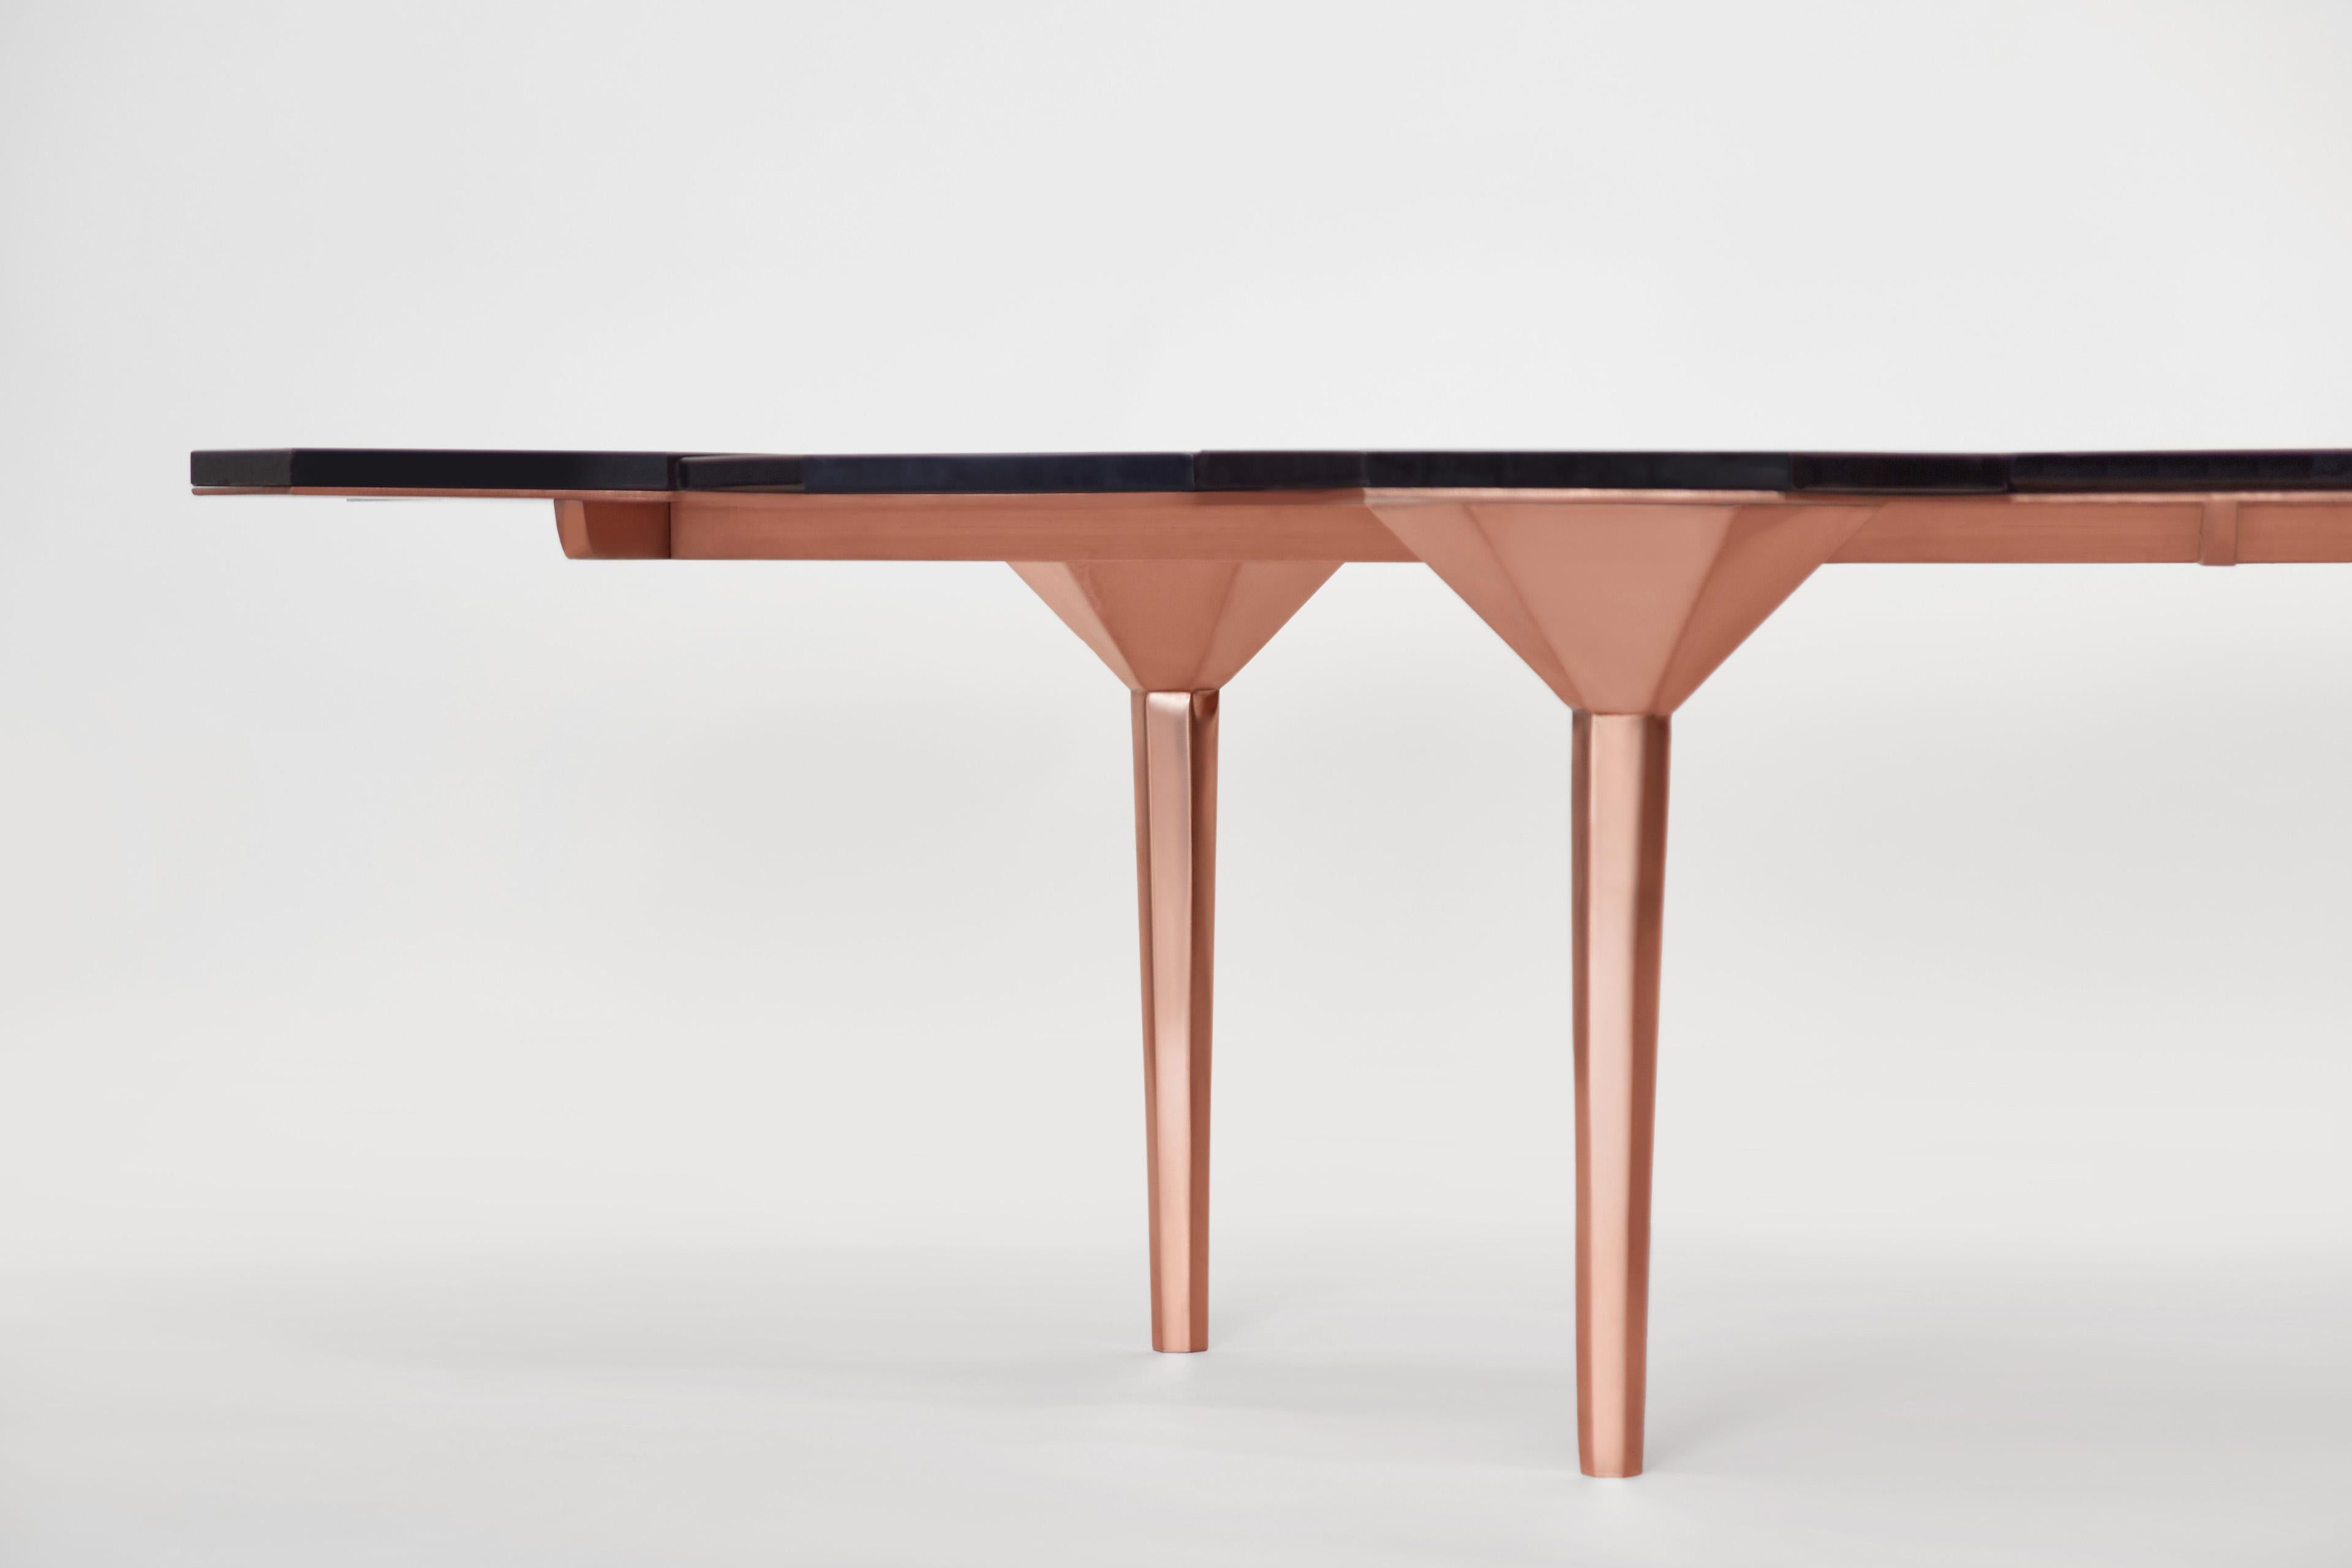 Copper Honeycomb Coffee Table by Sten Studio, Represented by Tuleste Factory